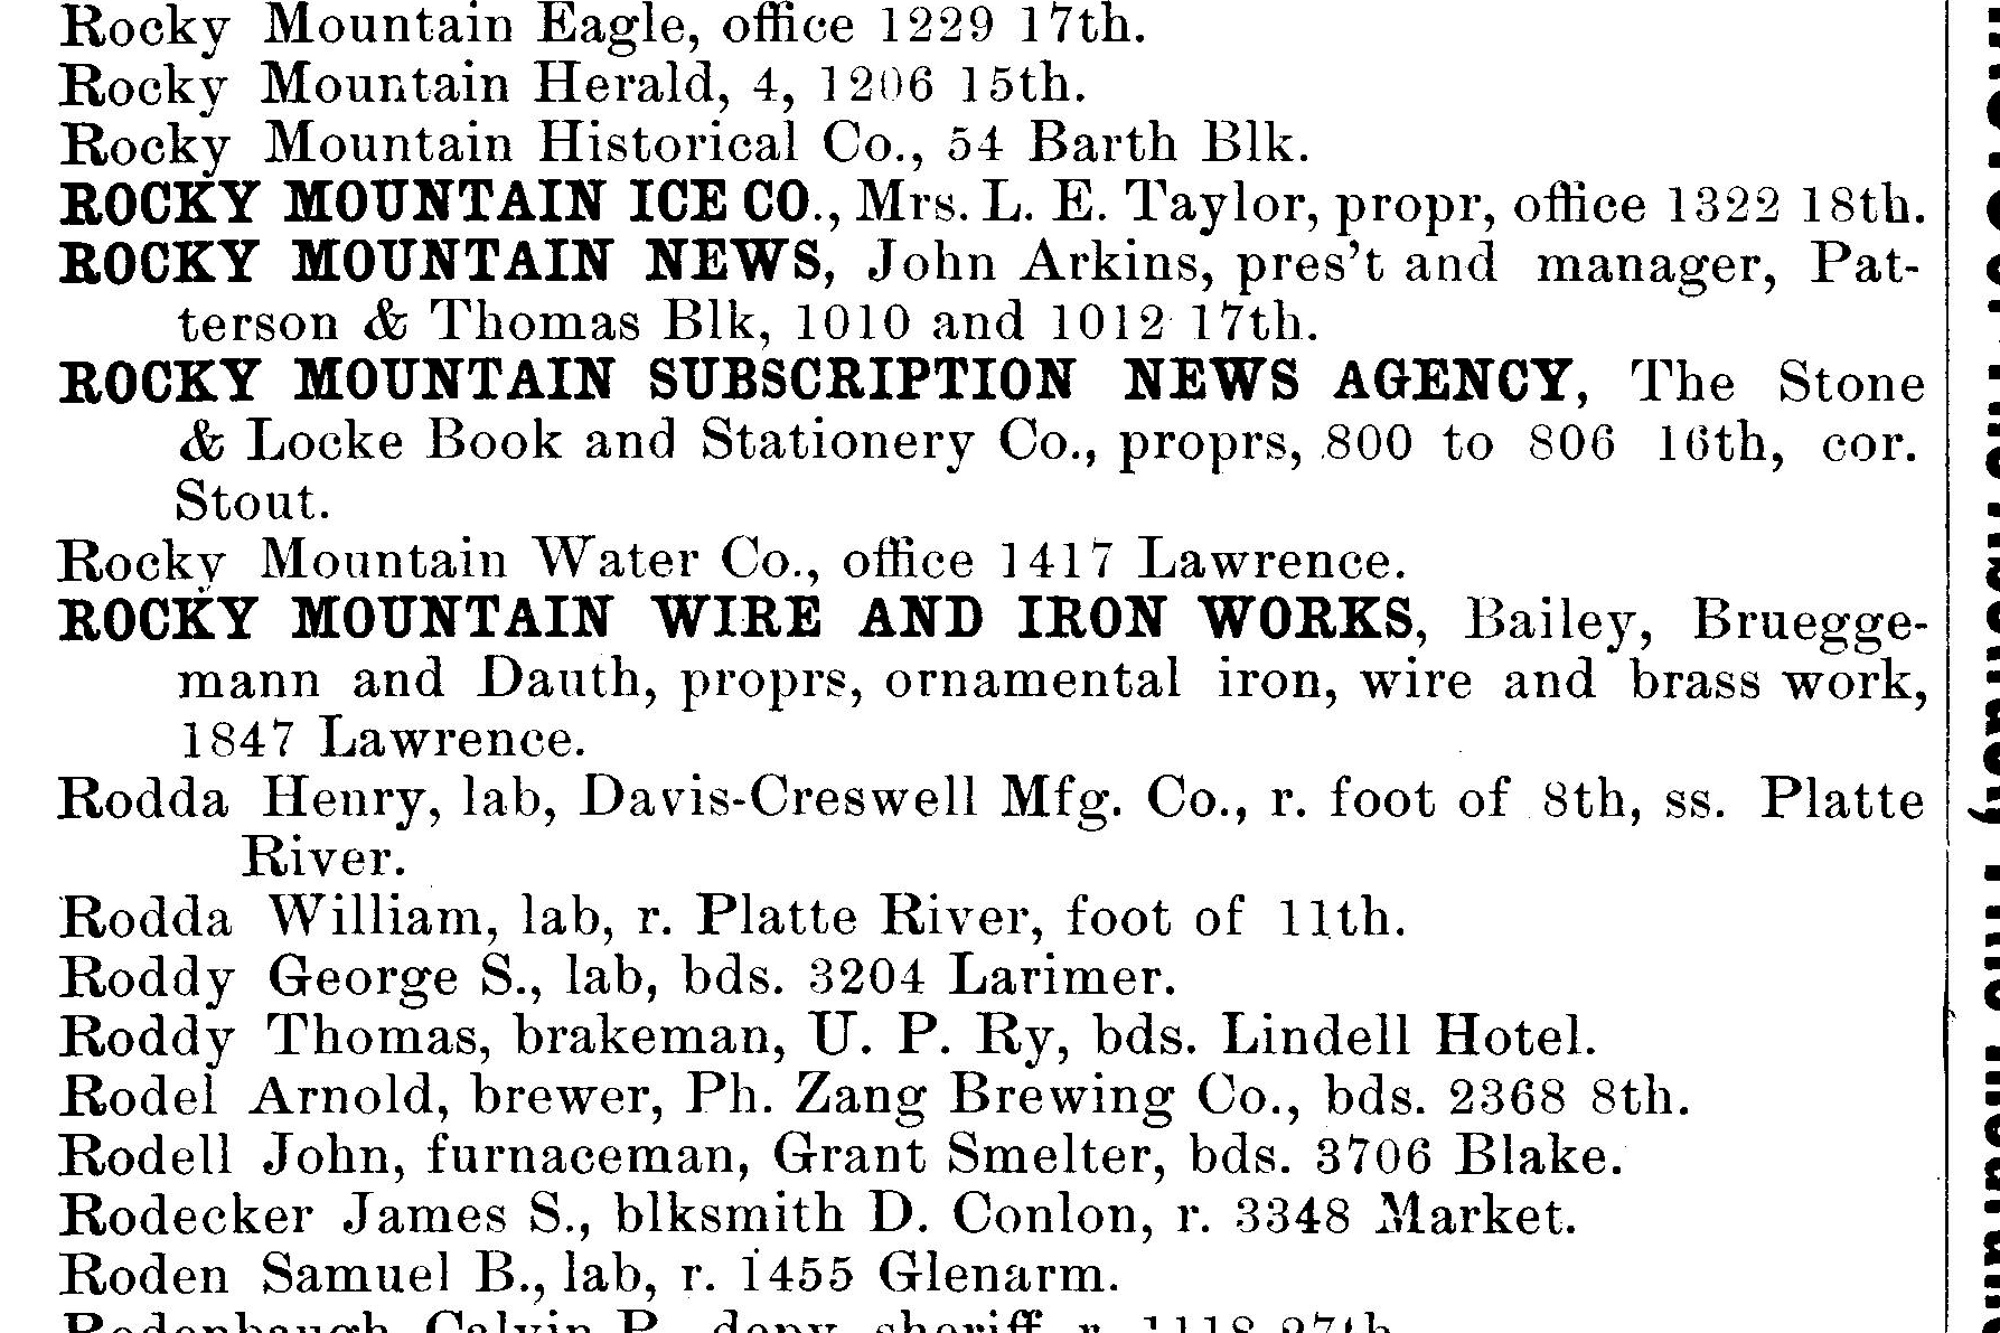 Dauth Family Archive - 1890 - Denver Directory - Entry For Rocky Mountain Wire and Iron Works